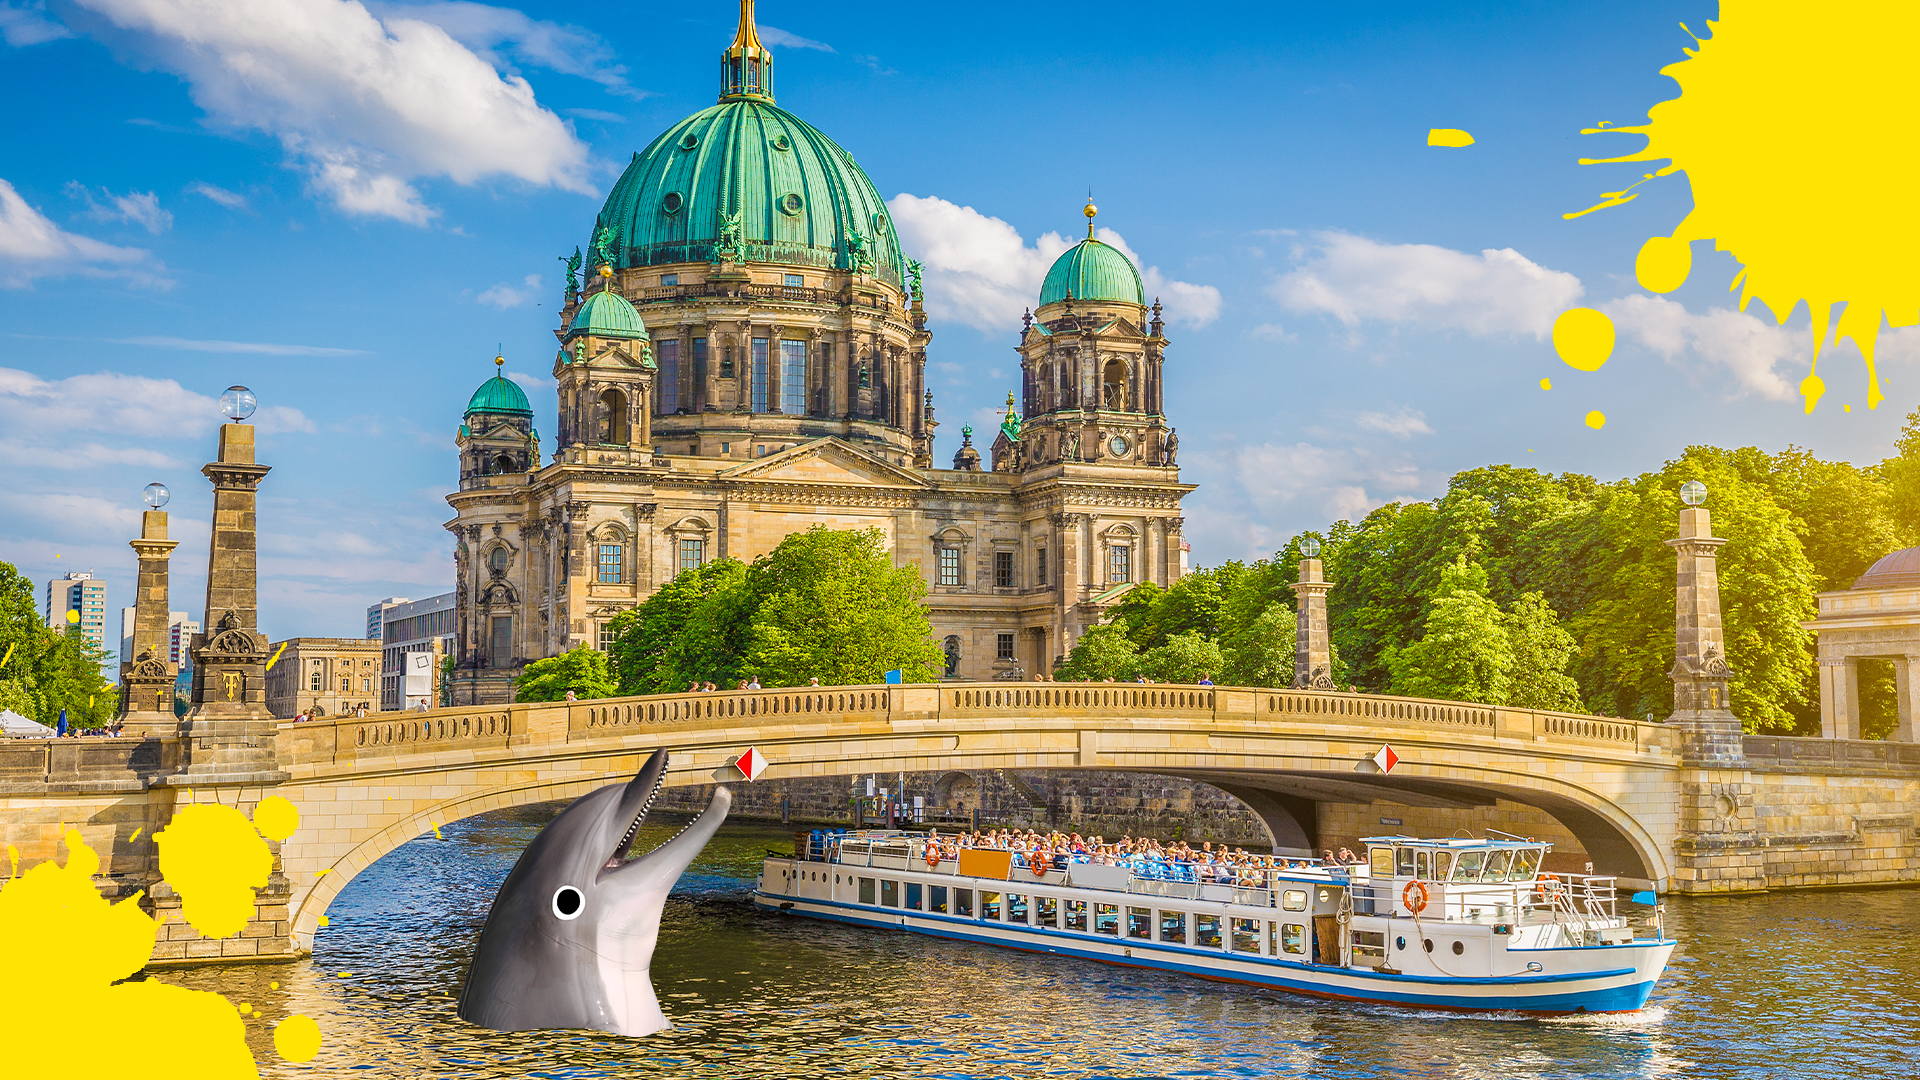 Berlin with splats and happy dolphin